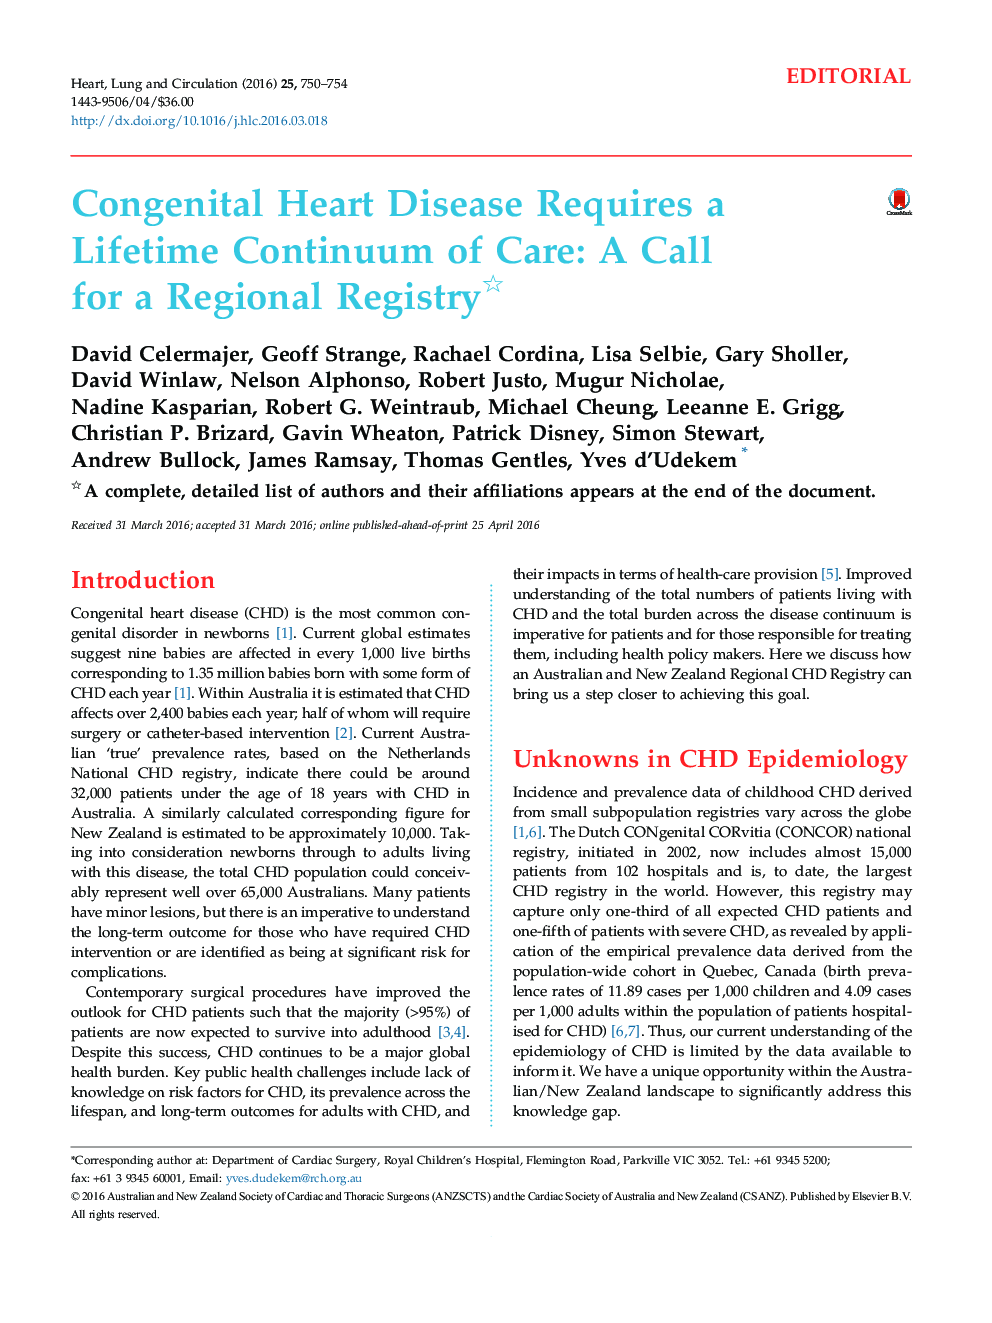 Congenital Heart Disease Requires a Lifetime Continuum of Care: A Call for a Regional Registry